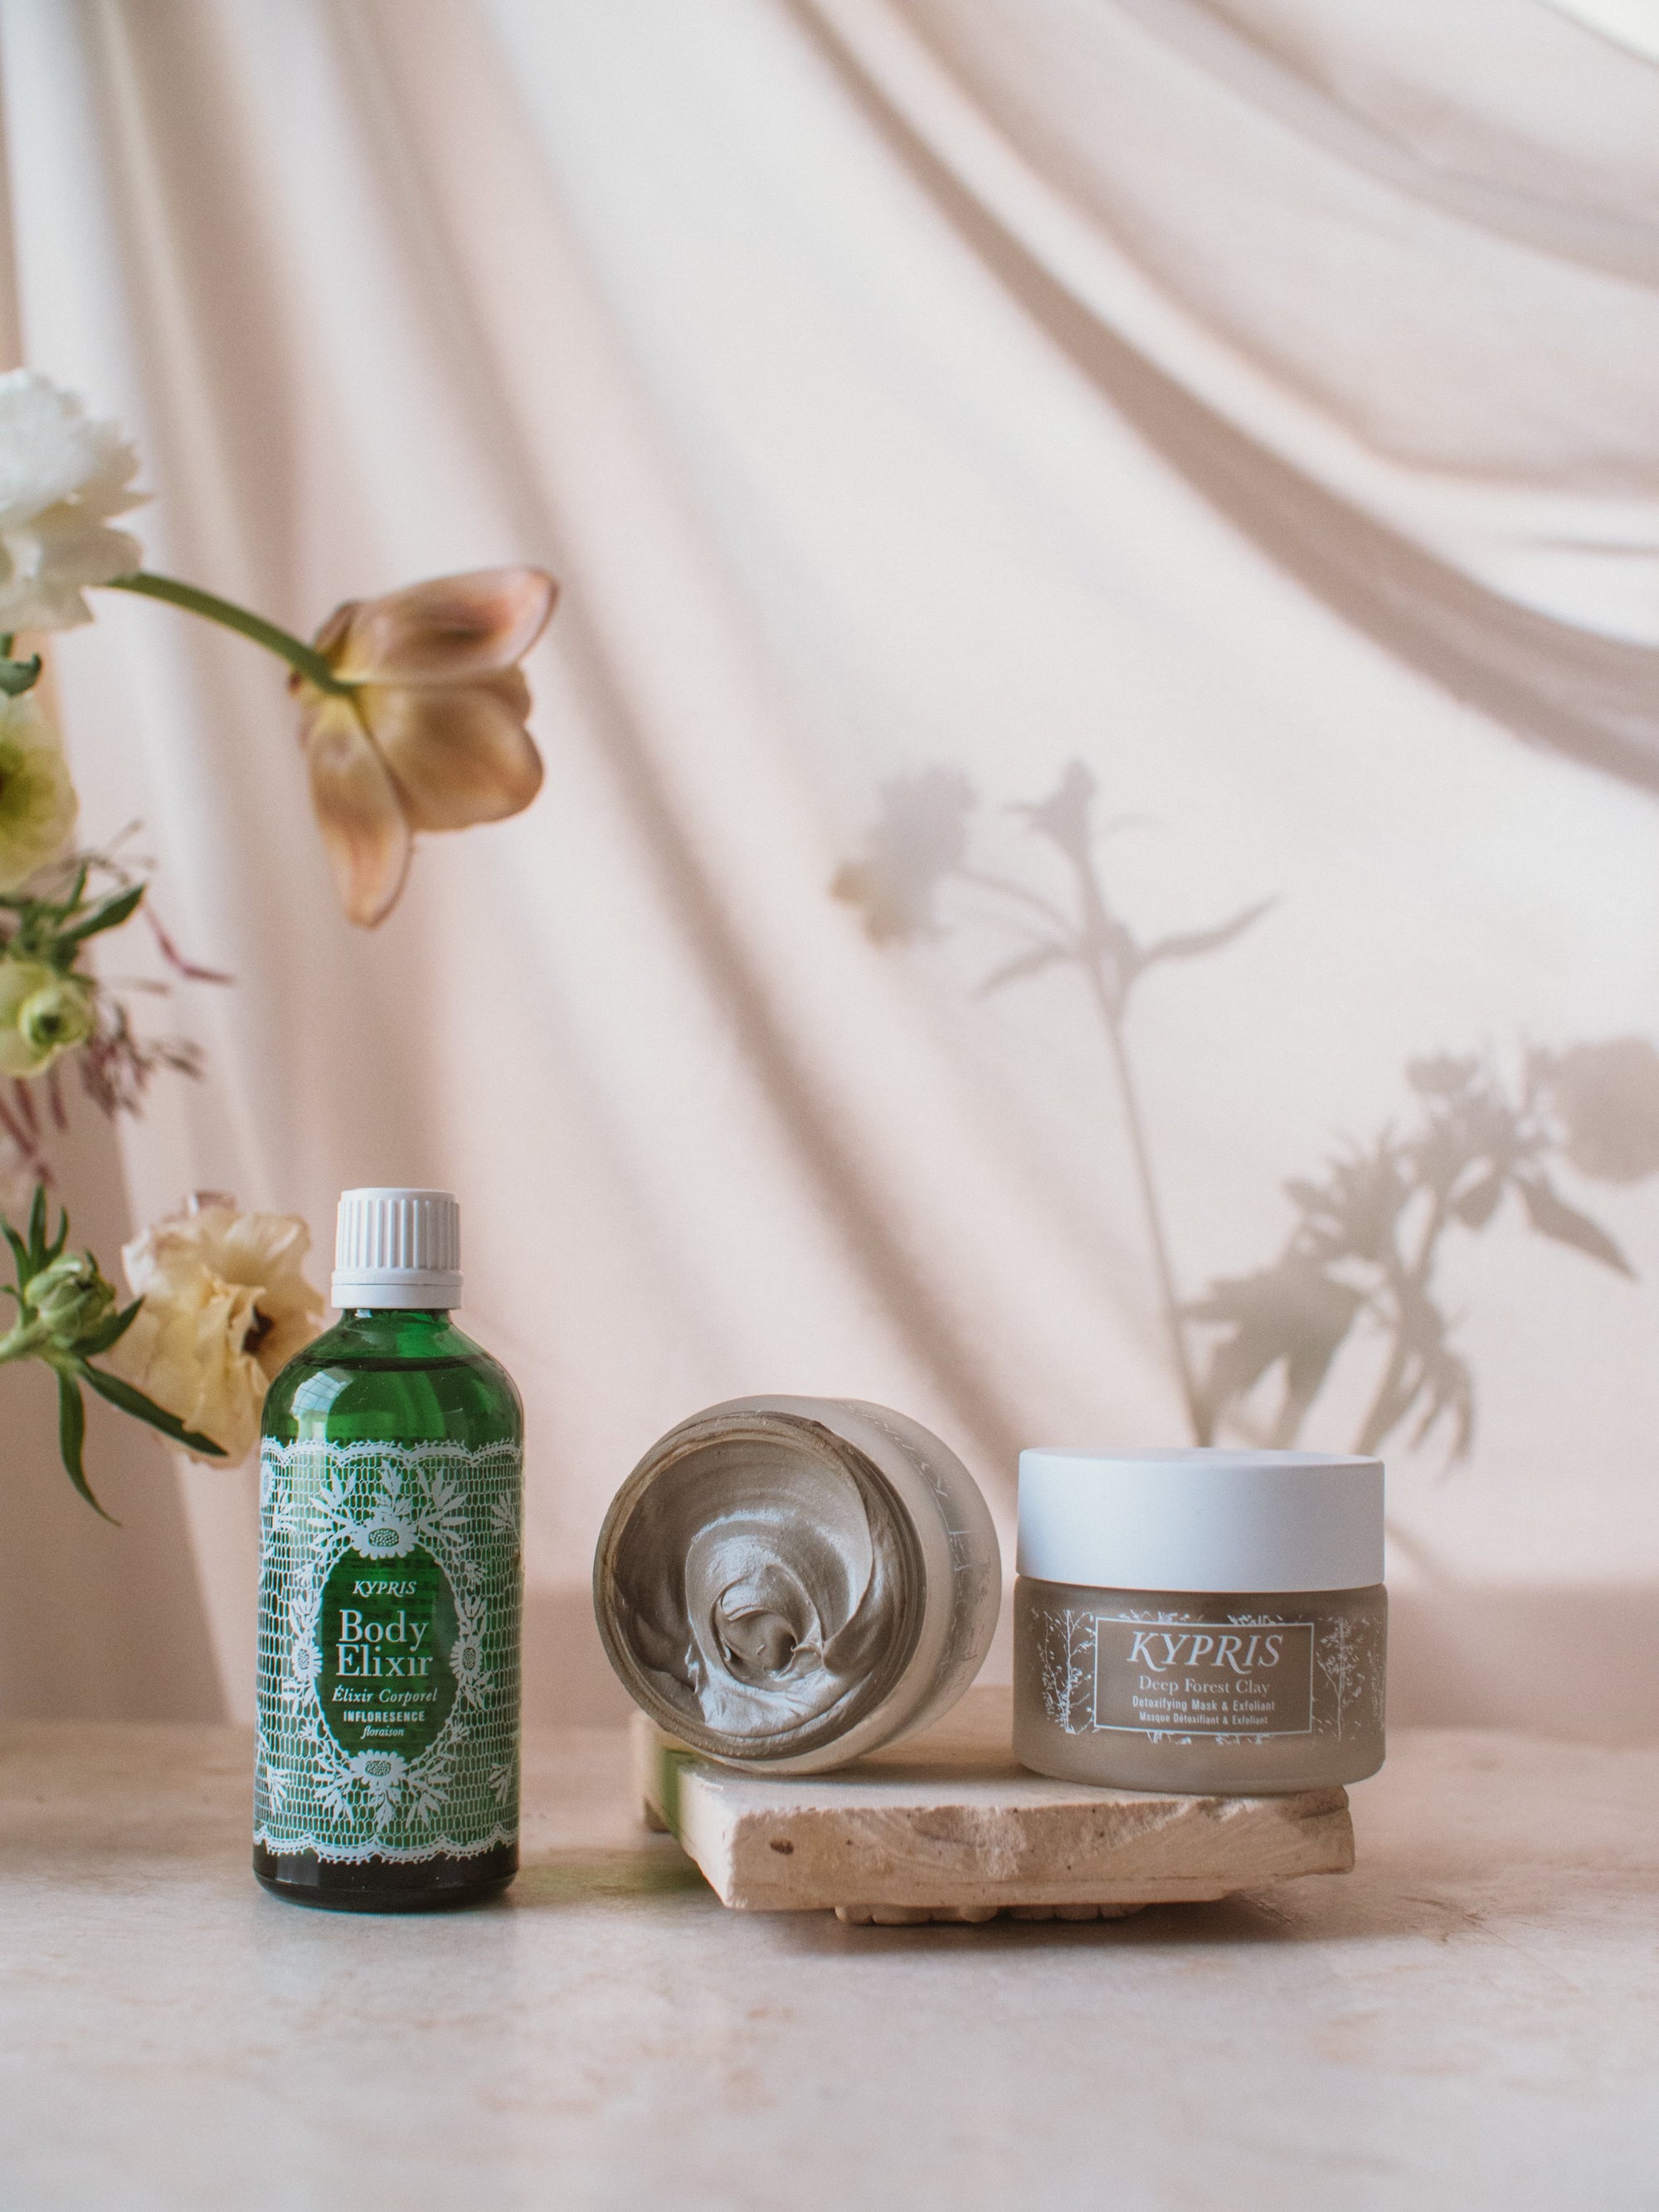 Body Elixir: Inflorescence body oil, in green glass bottle and Deep Forest Clay Mask, in frosted glass jar.